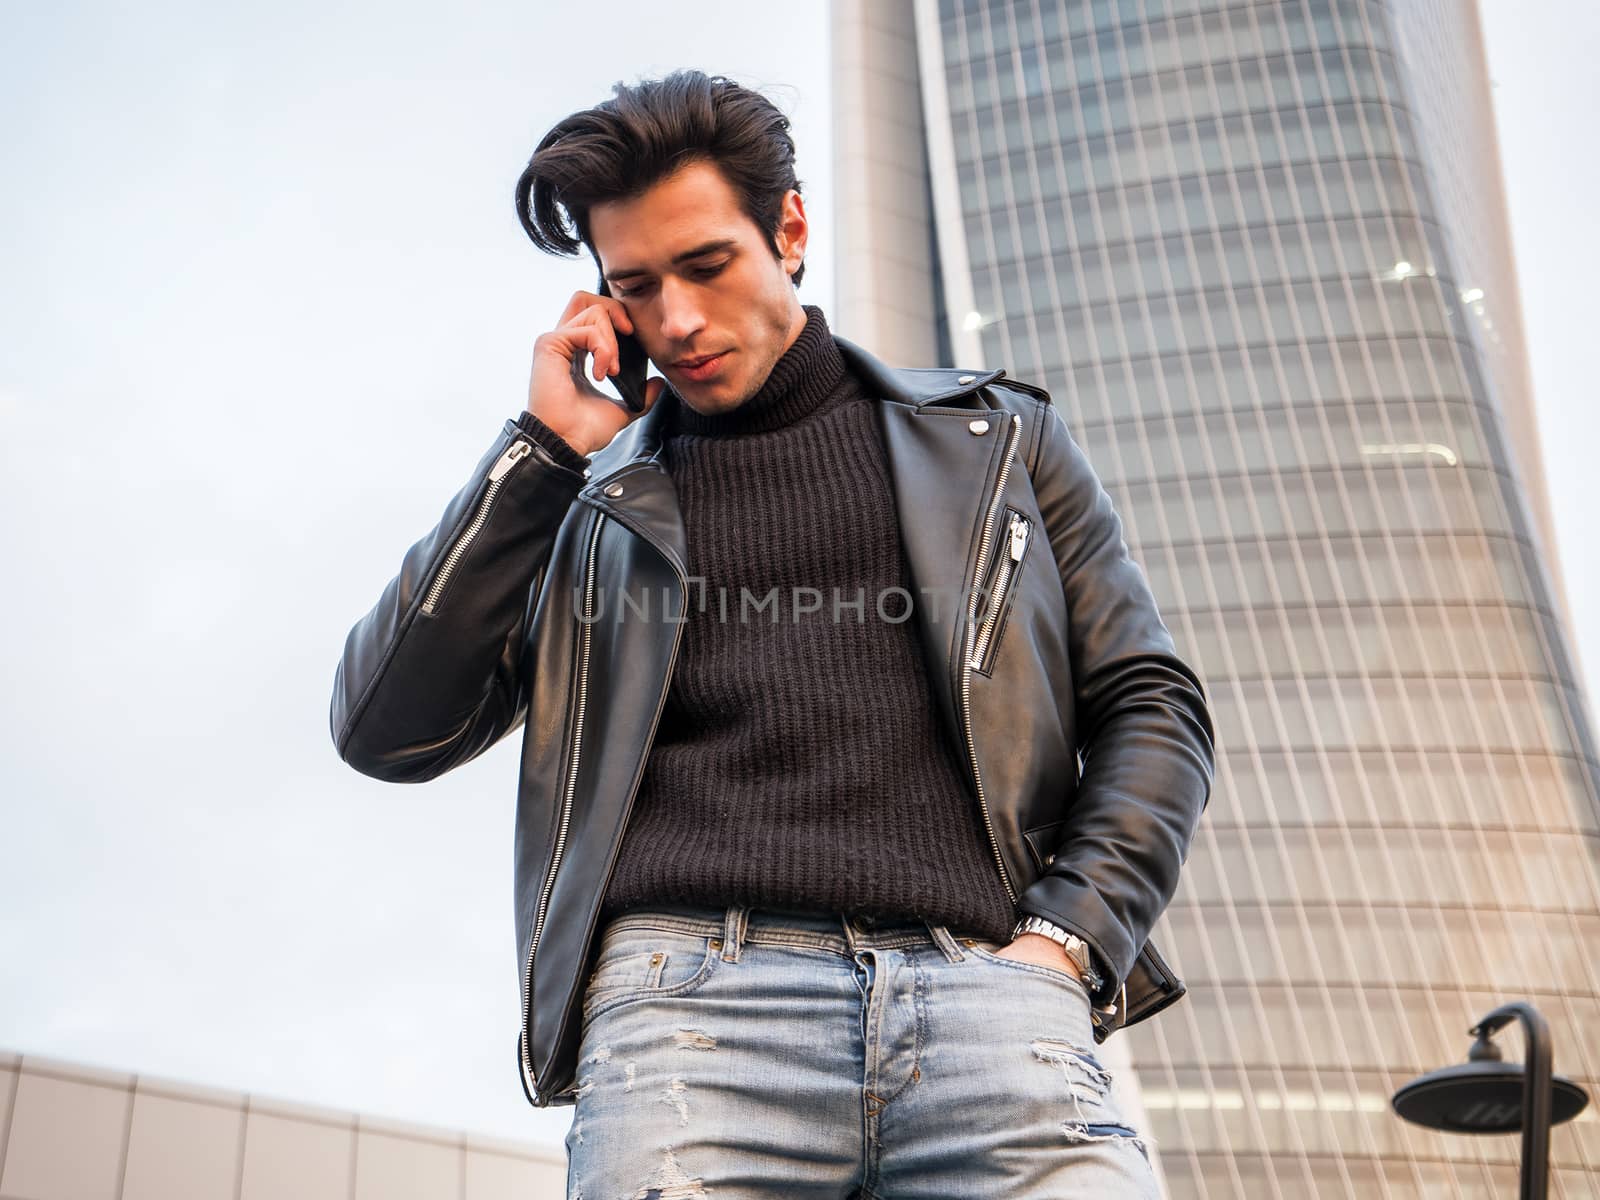 One handsome young man in urban setting in modern city, calling with cellphone, standing, wearing black leather jacket and jeans